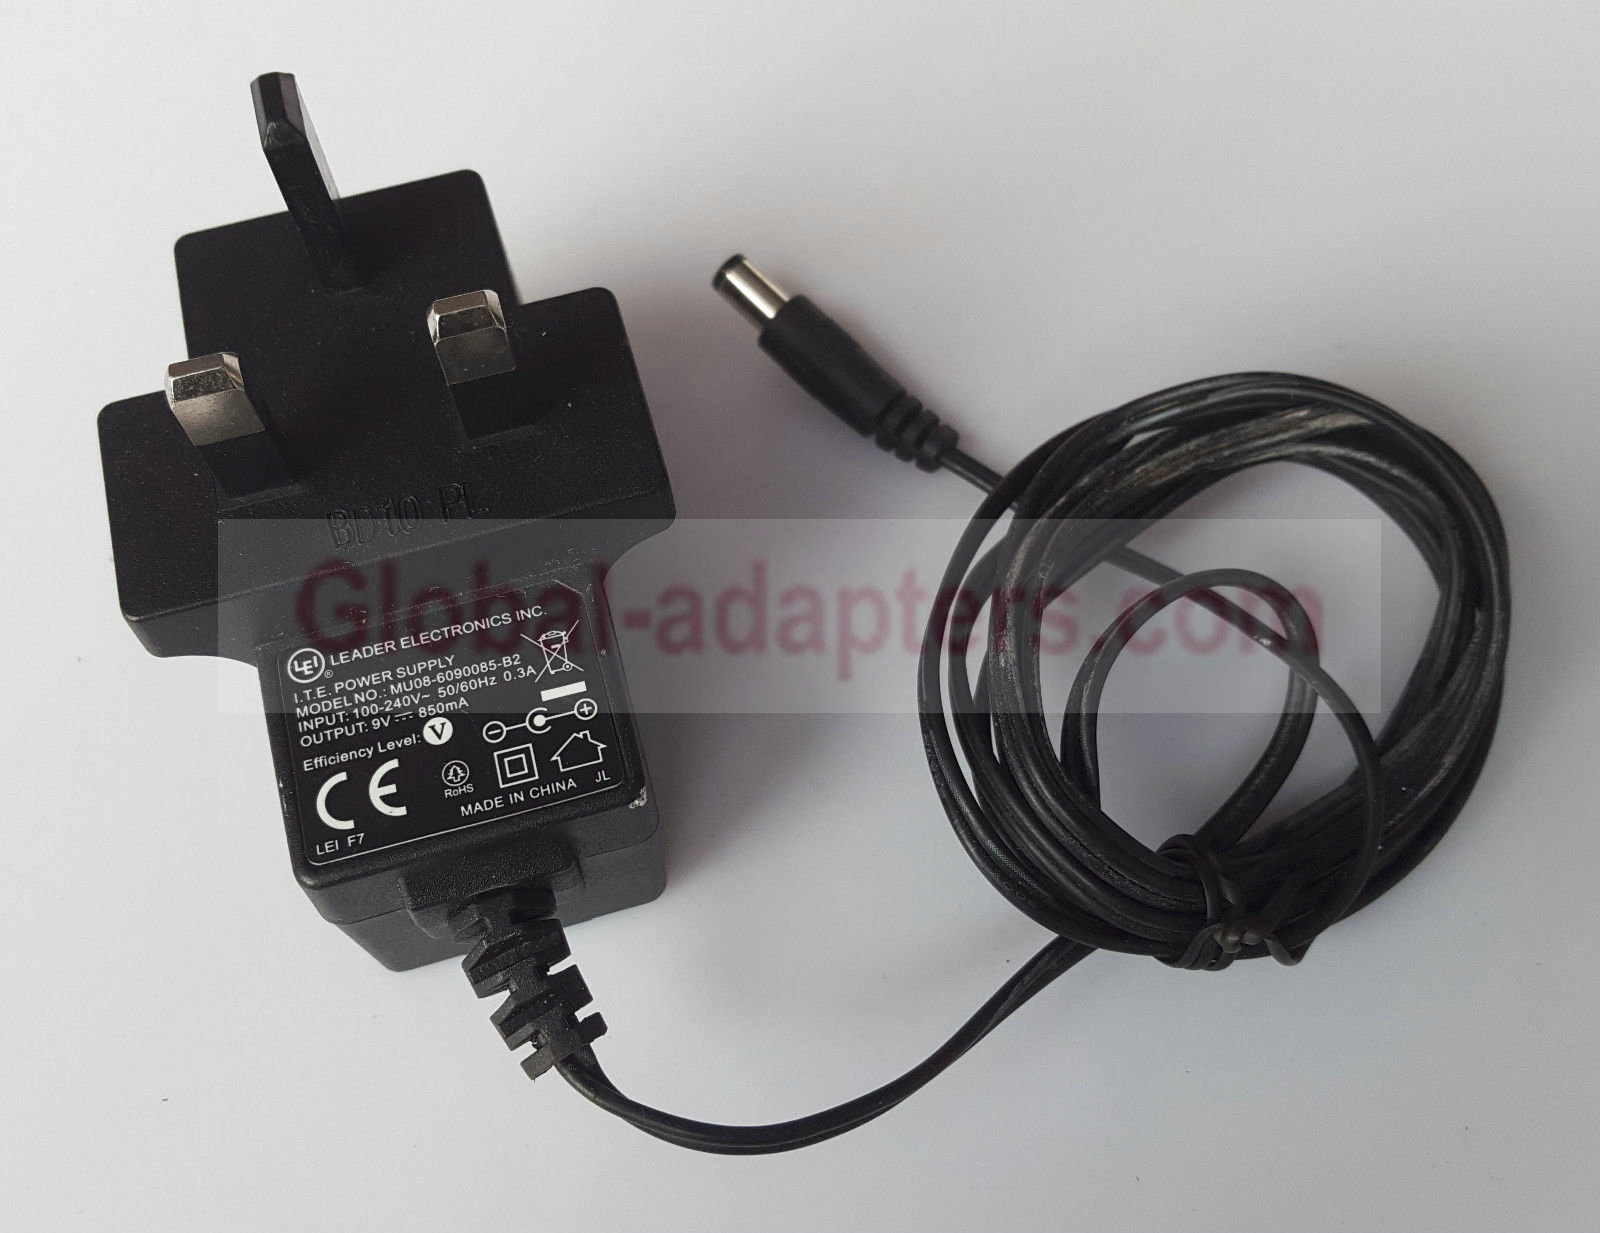 NEW 9V 0.85A LEI MU08-6090085-B2 LEADER ELECTRON INC. AC/DC POWER ADAPTER - Click Image to Close